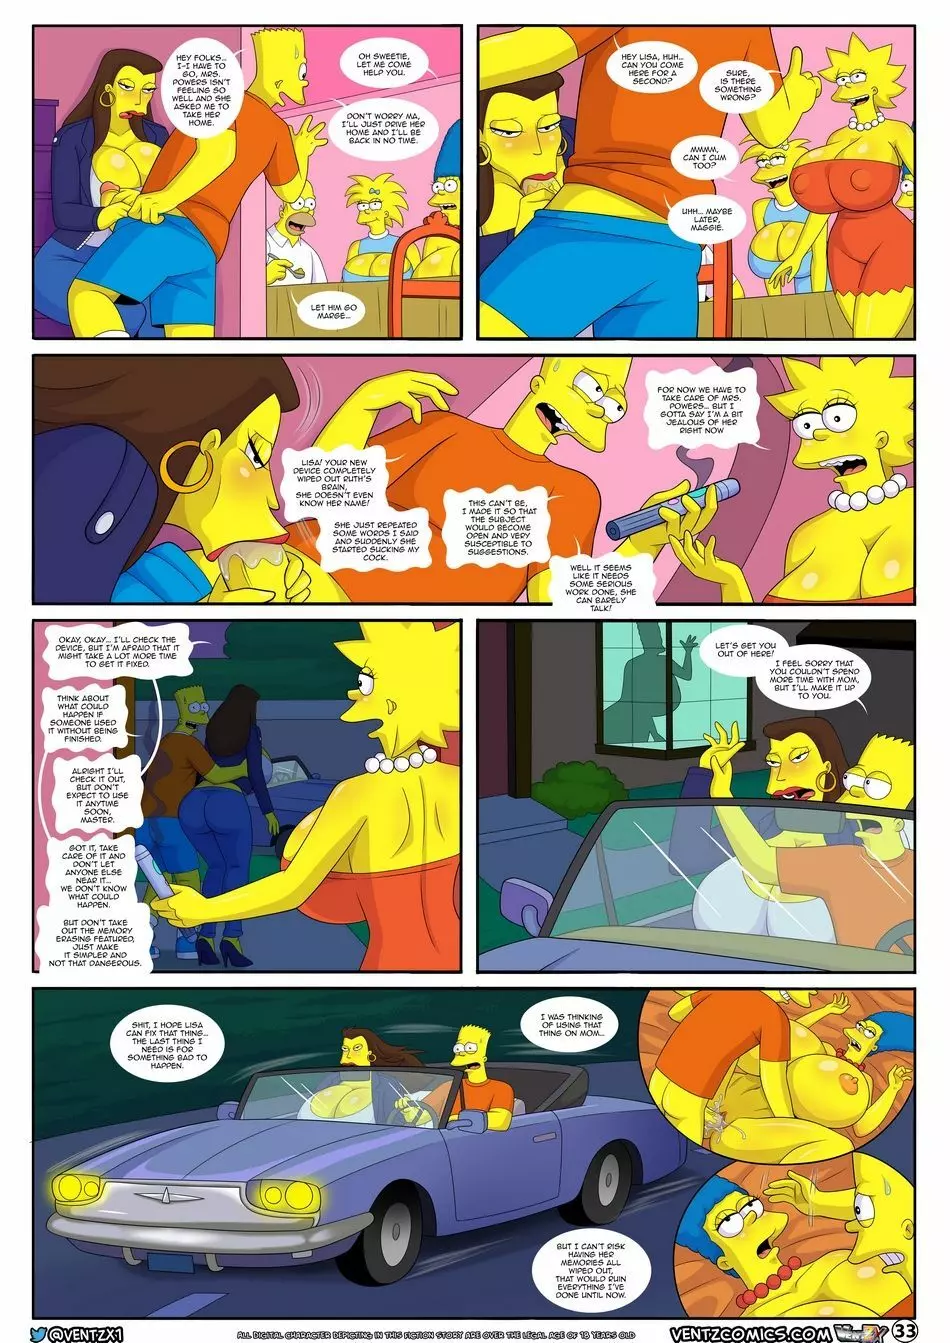 Bearmale’s collection - page458